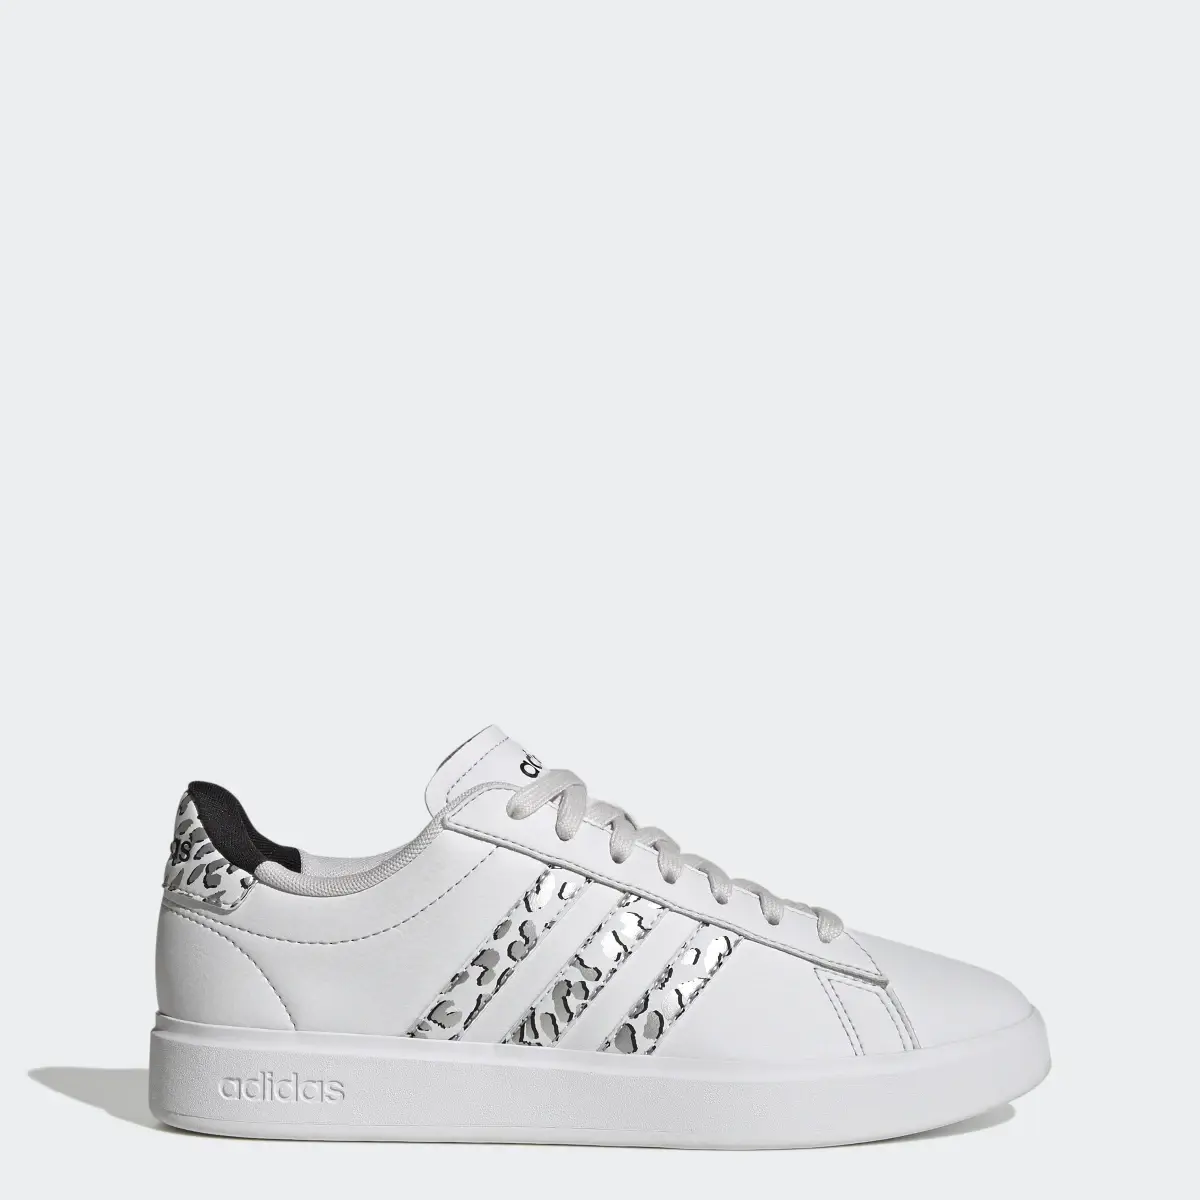 Adidas Grand Court Cloudfoam Lifestyle Court Comfort Style Schuh. 1